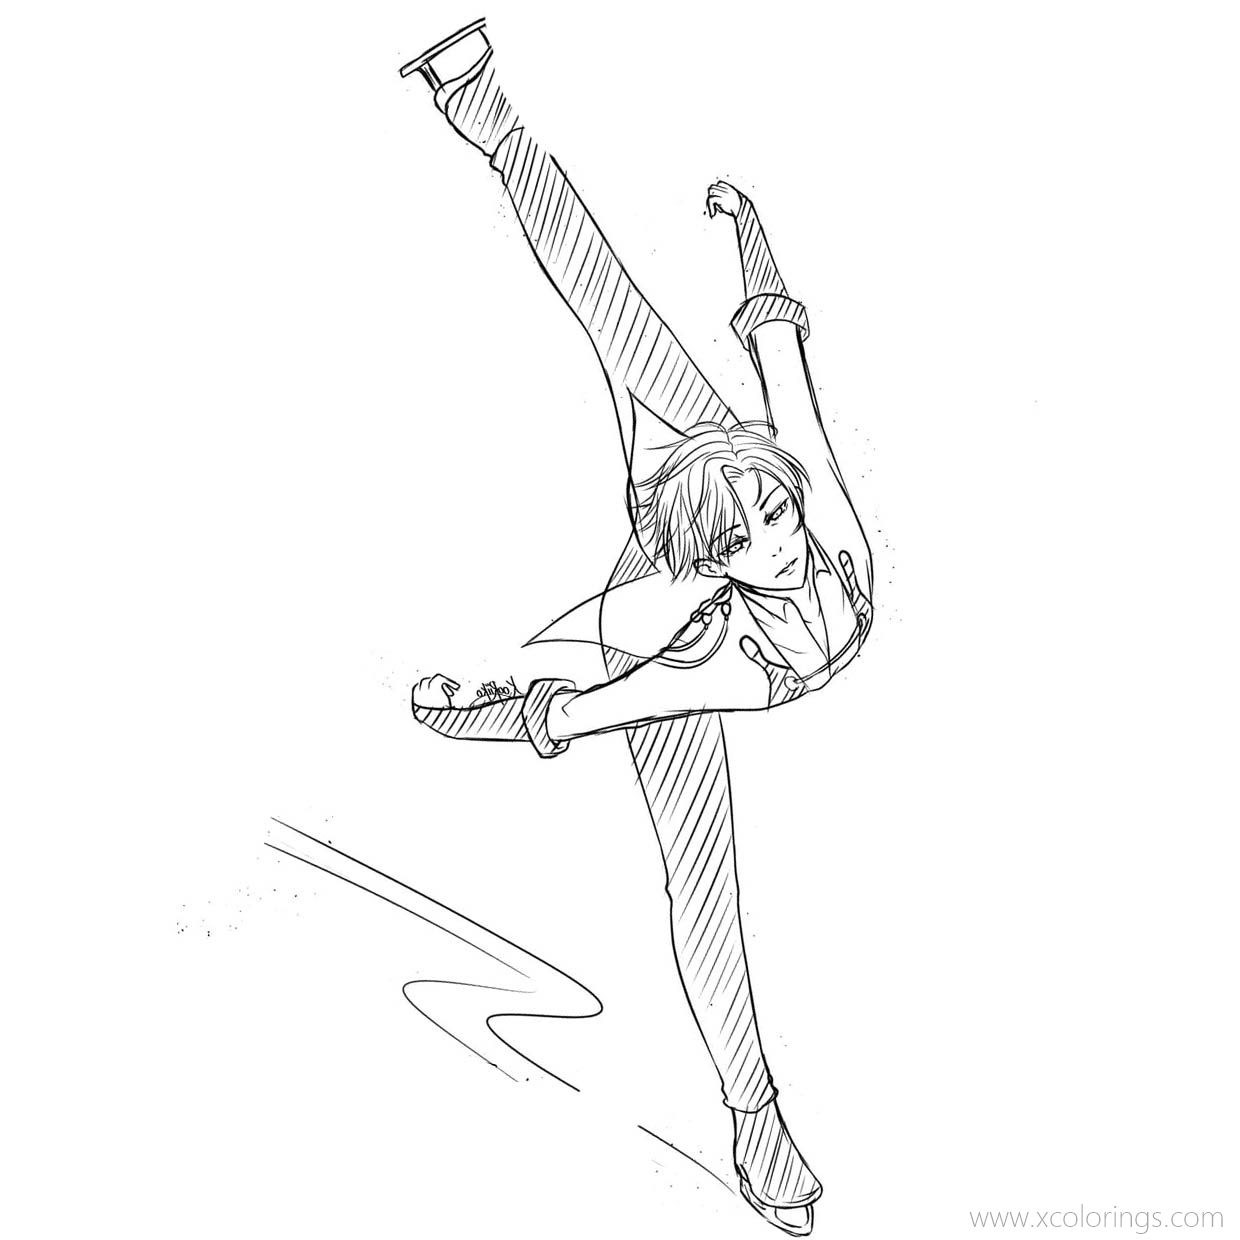 Free Yuri on Ice Coloring Pages Victor is Skating printable